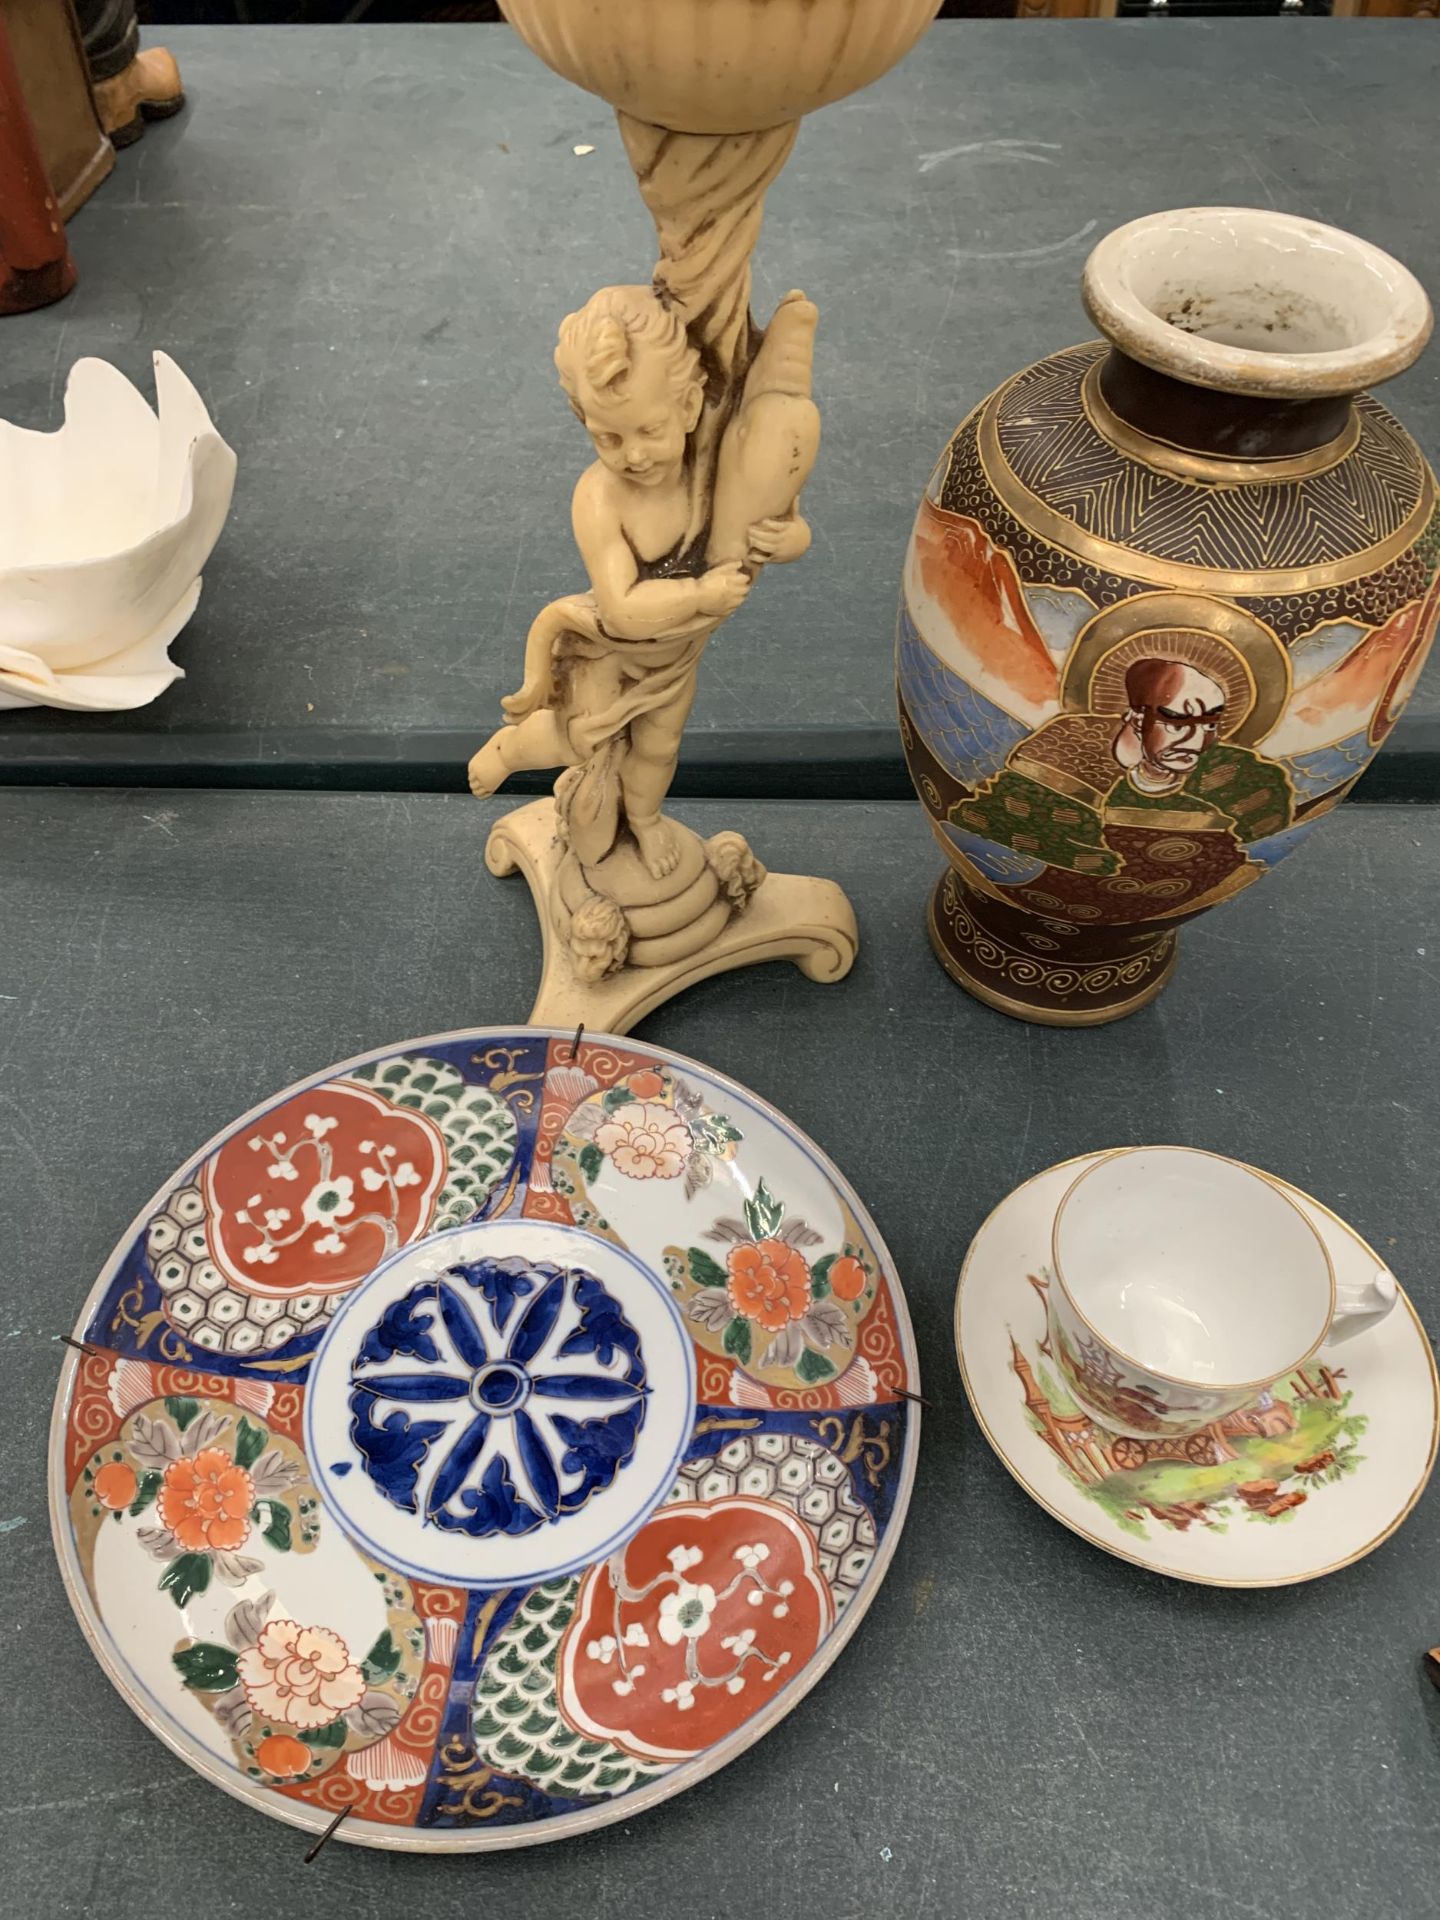 A COLLECTION OF ORIENTAL ITEMS TO INCLUDE A VASE, BOWLS AND PLATES, CUPS AND SAUCERS, A METAL - Image 3 of 5